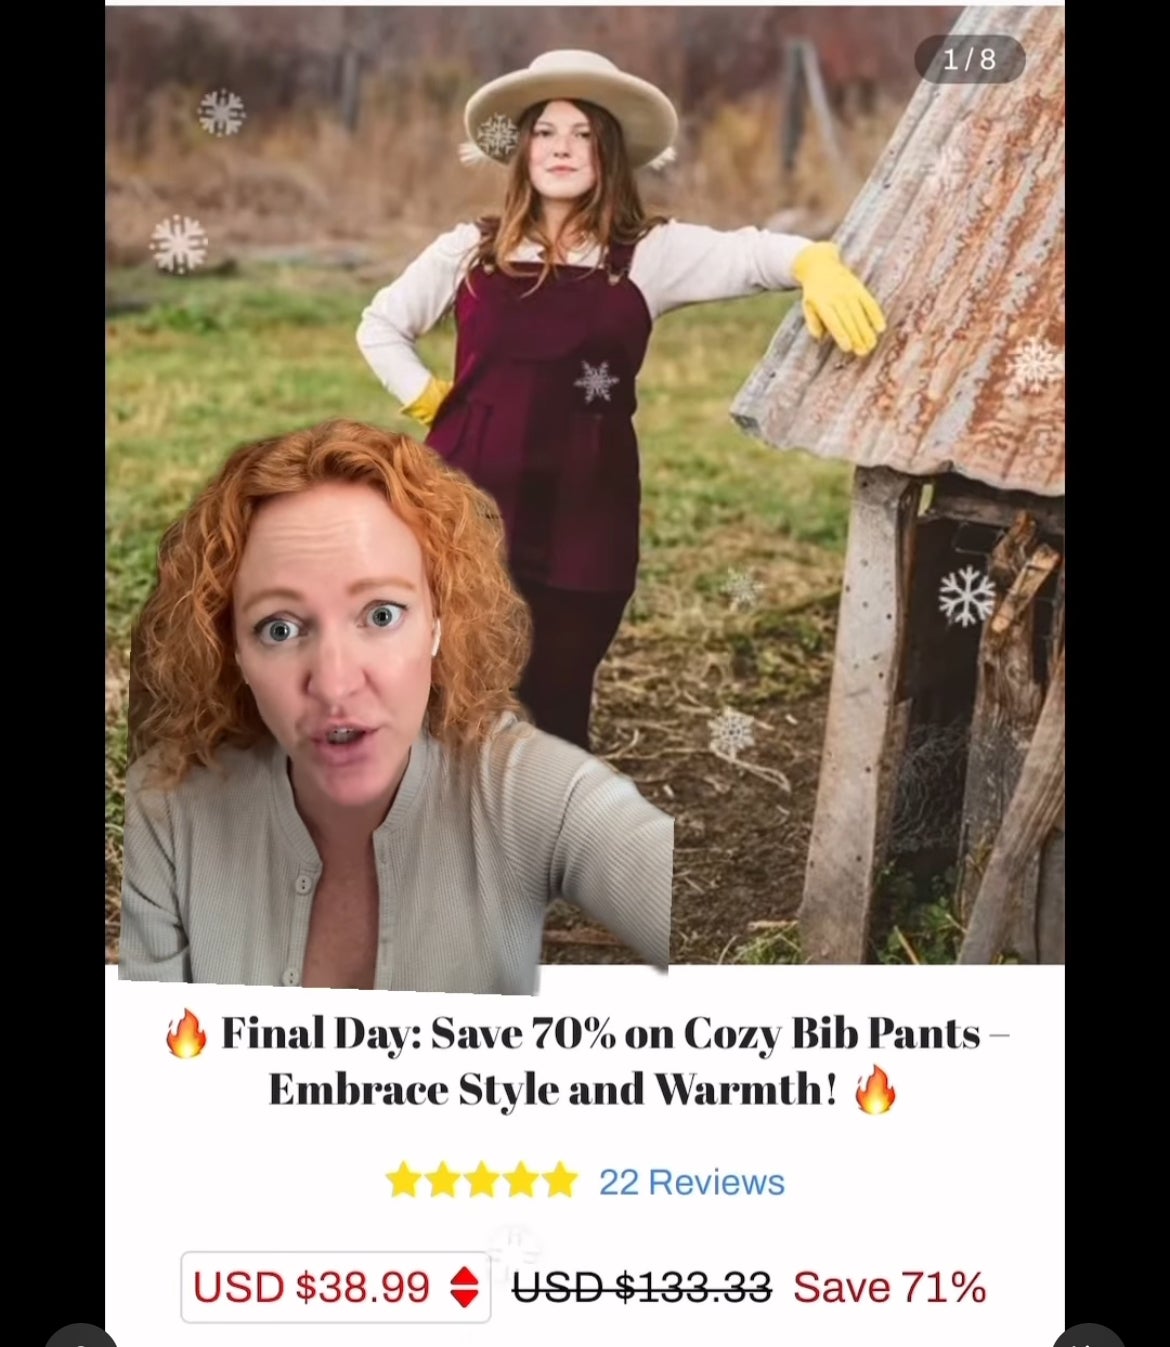 Laura posing in a farm setting with sale banner for cozy bib pants at $38.99, 71% off from $133.31